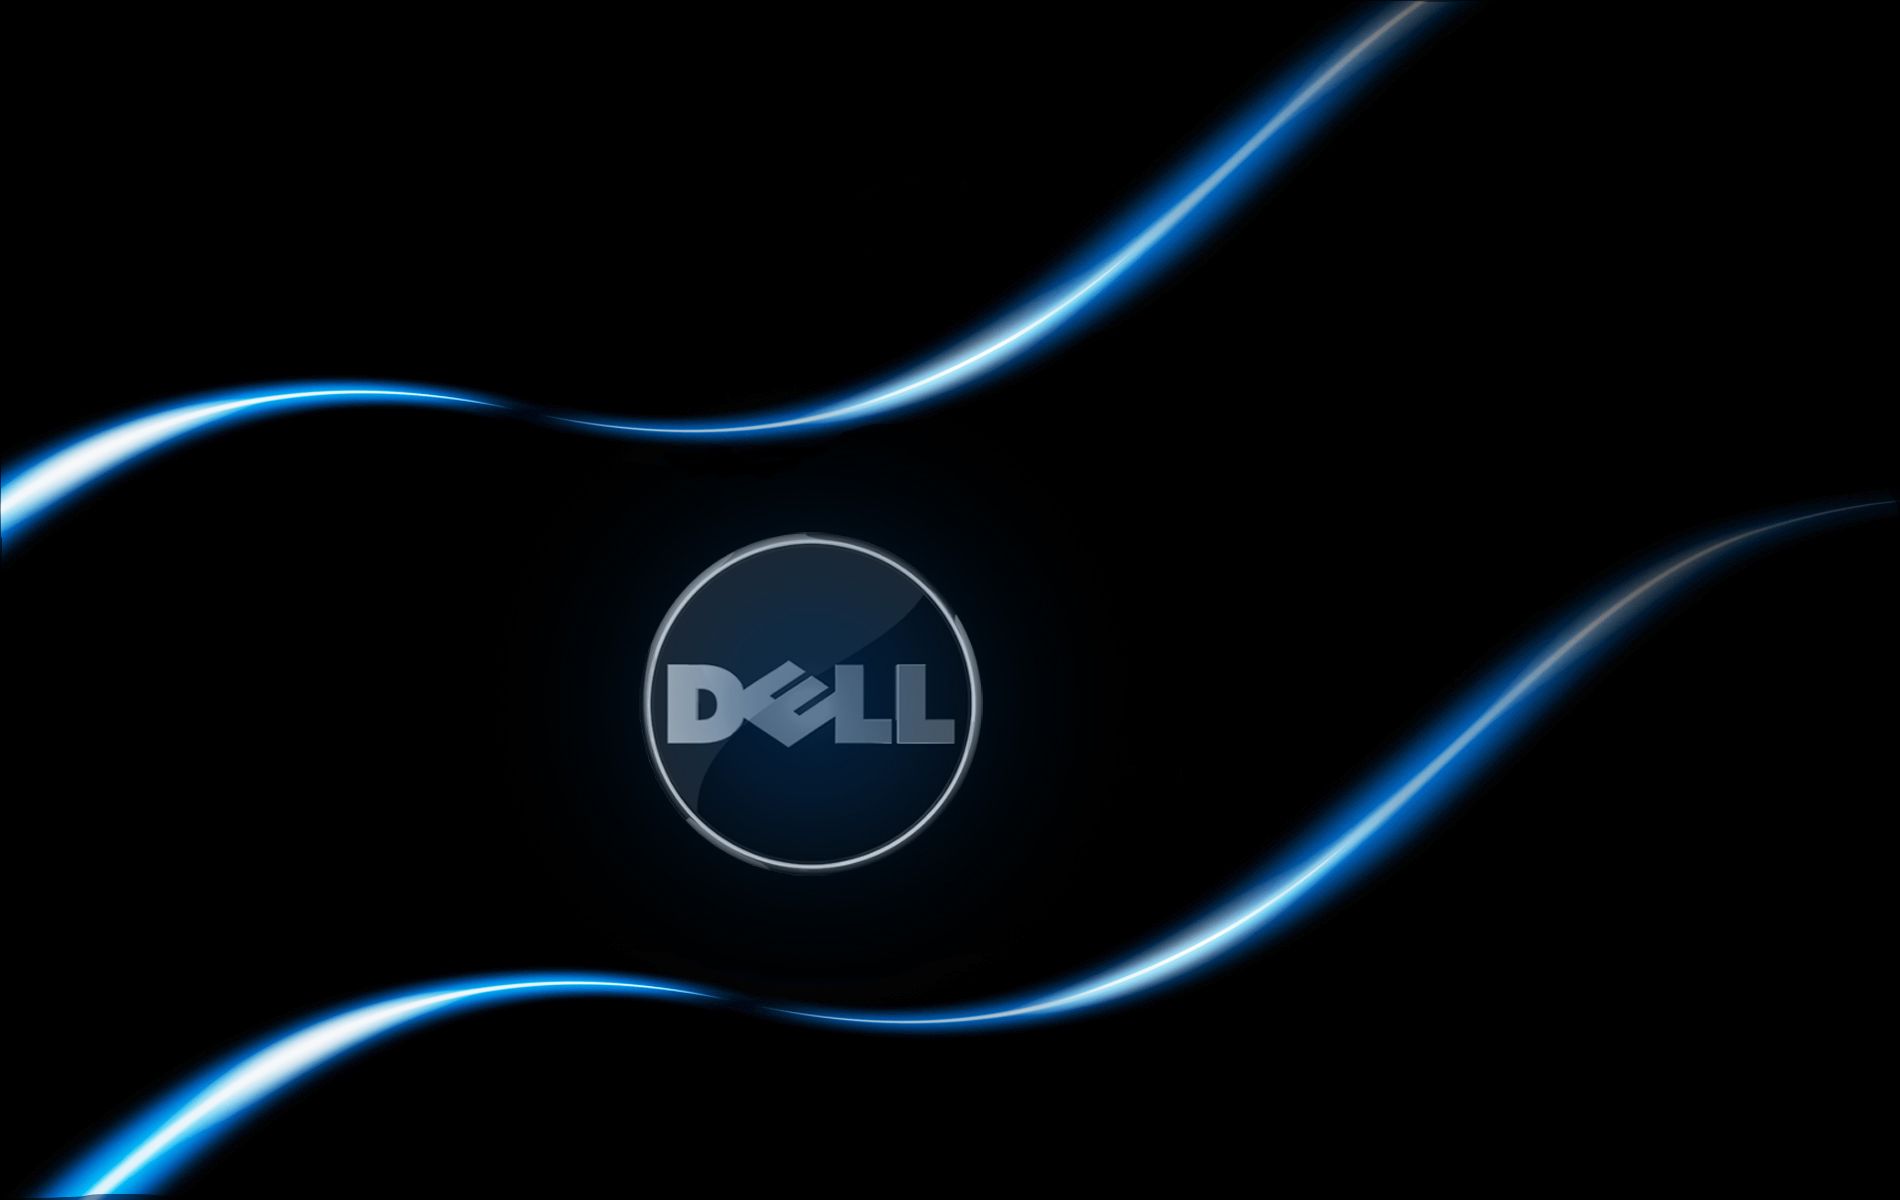 Dell inspiron hd wallpapers